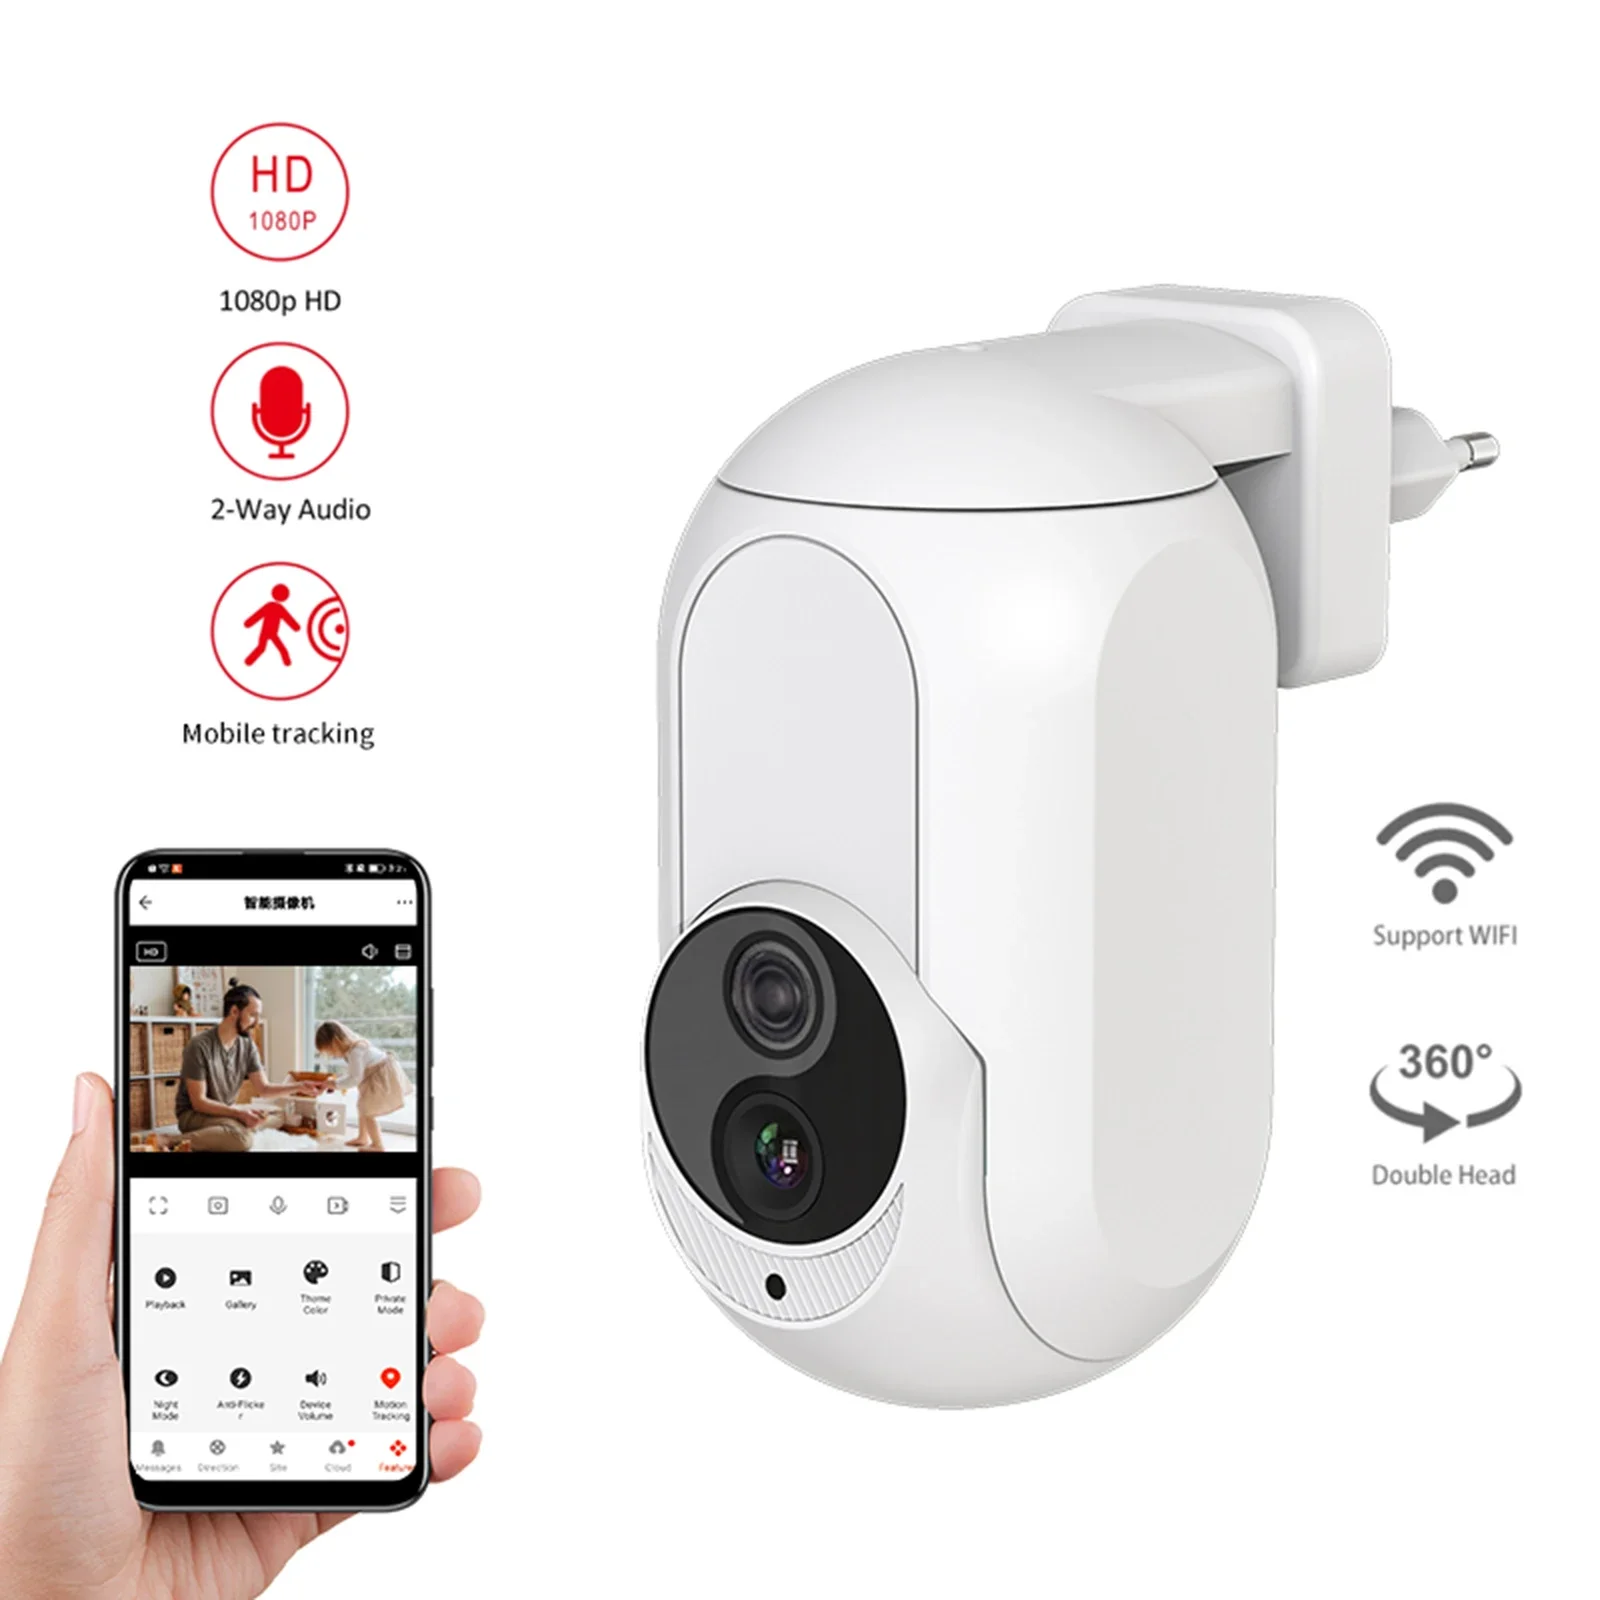 smart-home-control-wifi-1080p-camera-plug-in-wall-home-security-protection-hd-night-vision-two-way-audio-baby-care-watch-anytime